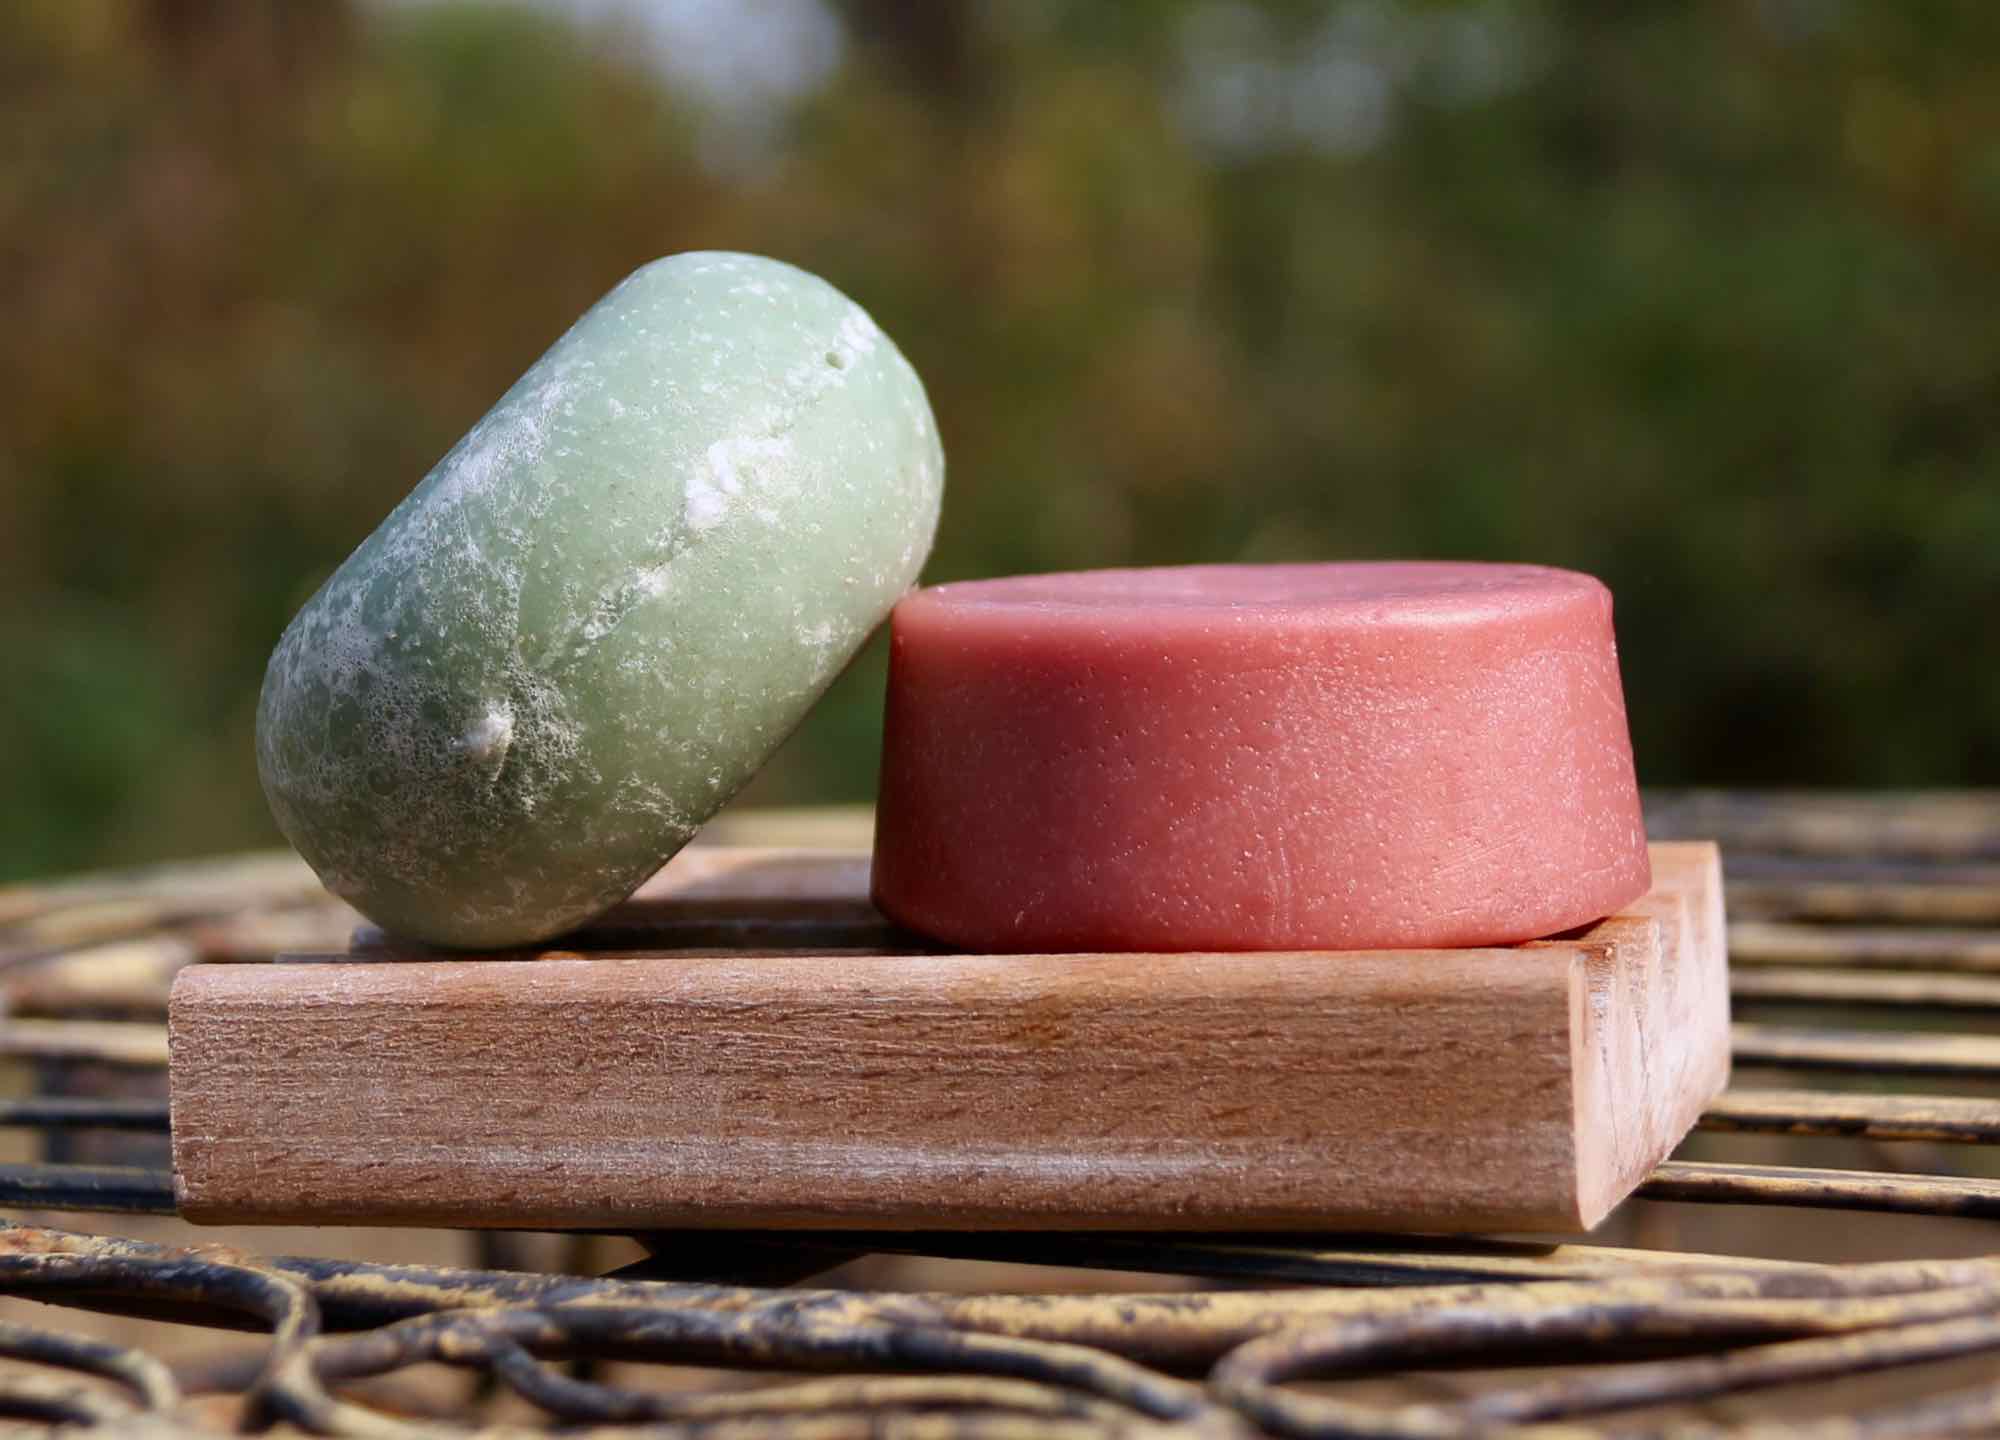 Green and pink shampoo and conditioner bars outdoors on a soap dish, with a green, natural background. Solid toiletries are an easy part of a sustainable travel routine.